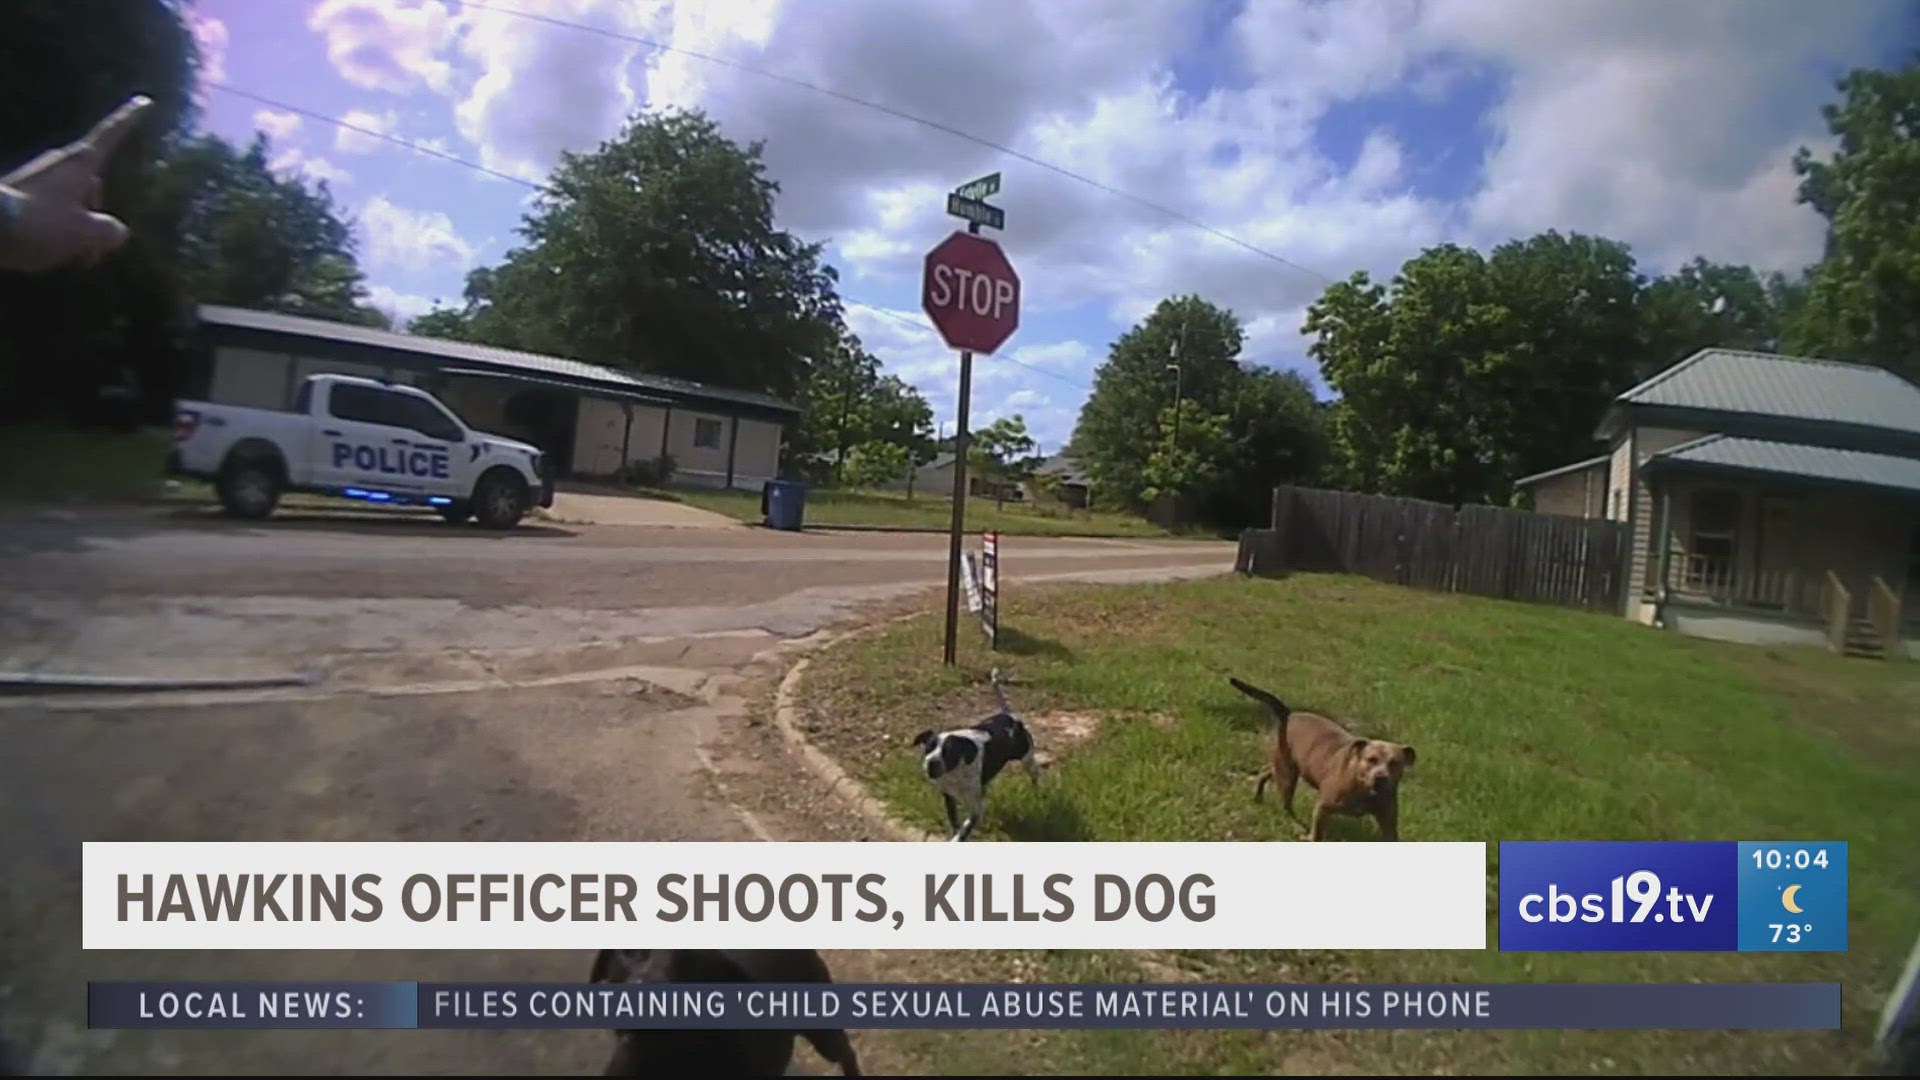 There's some controversy brewing in Hawkins after a police officer shot and killed a dog. The incident happened on May 2 near the intersection of Humble and Estelle.